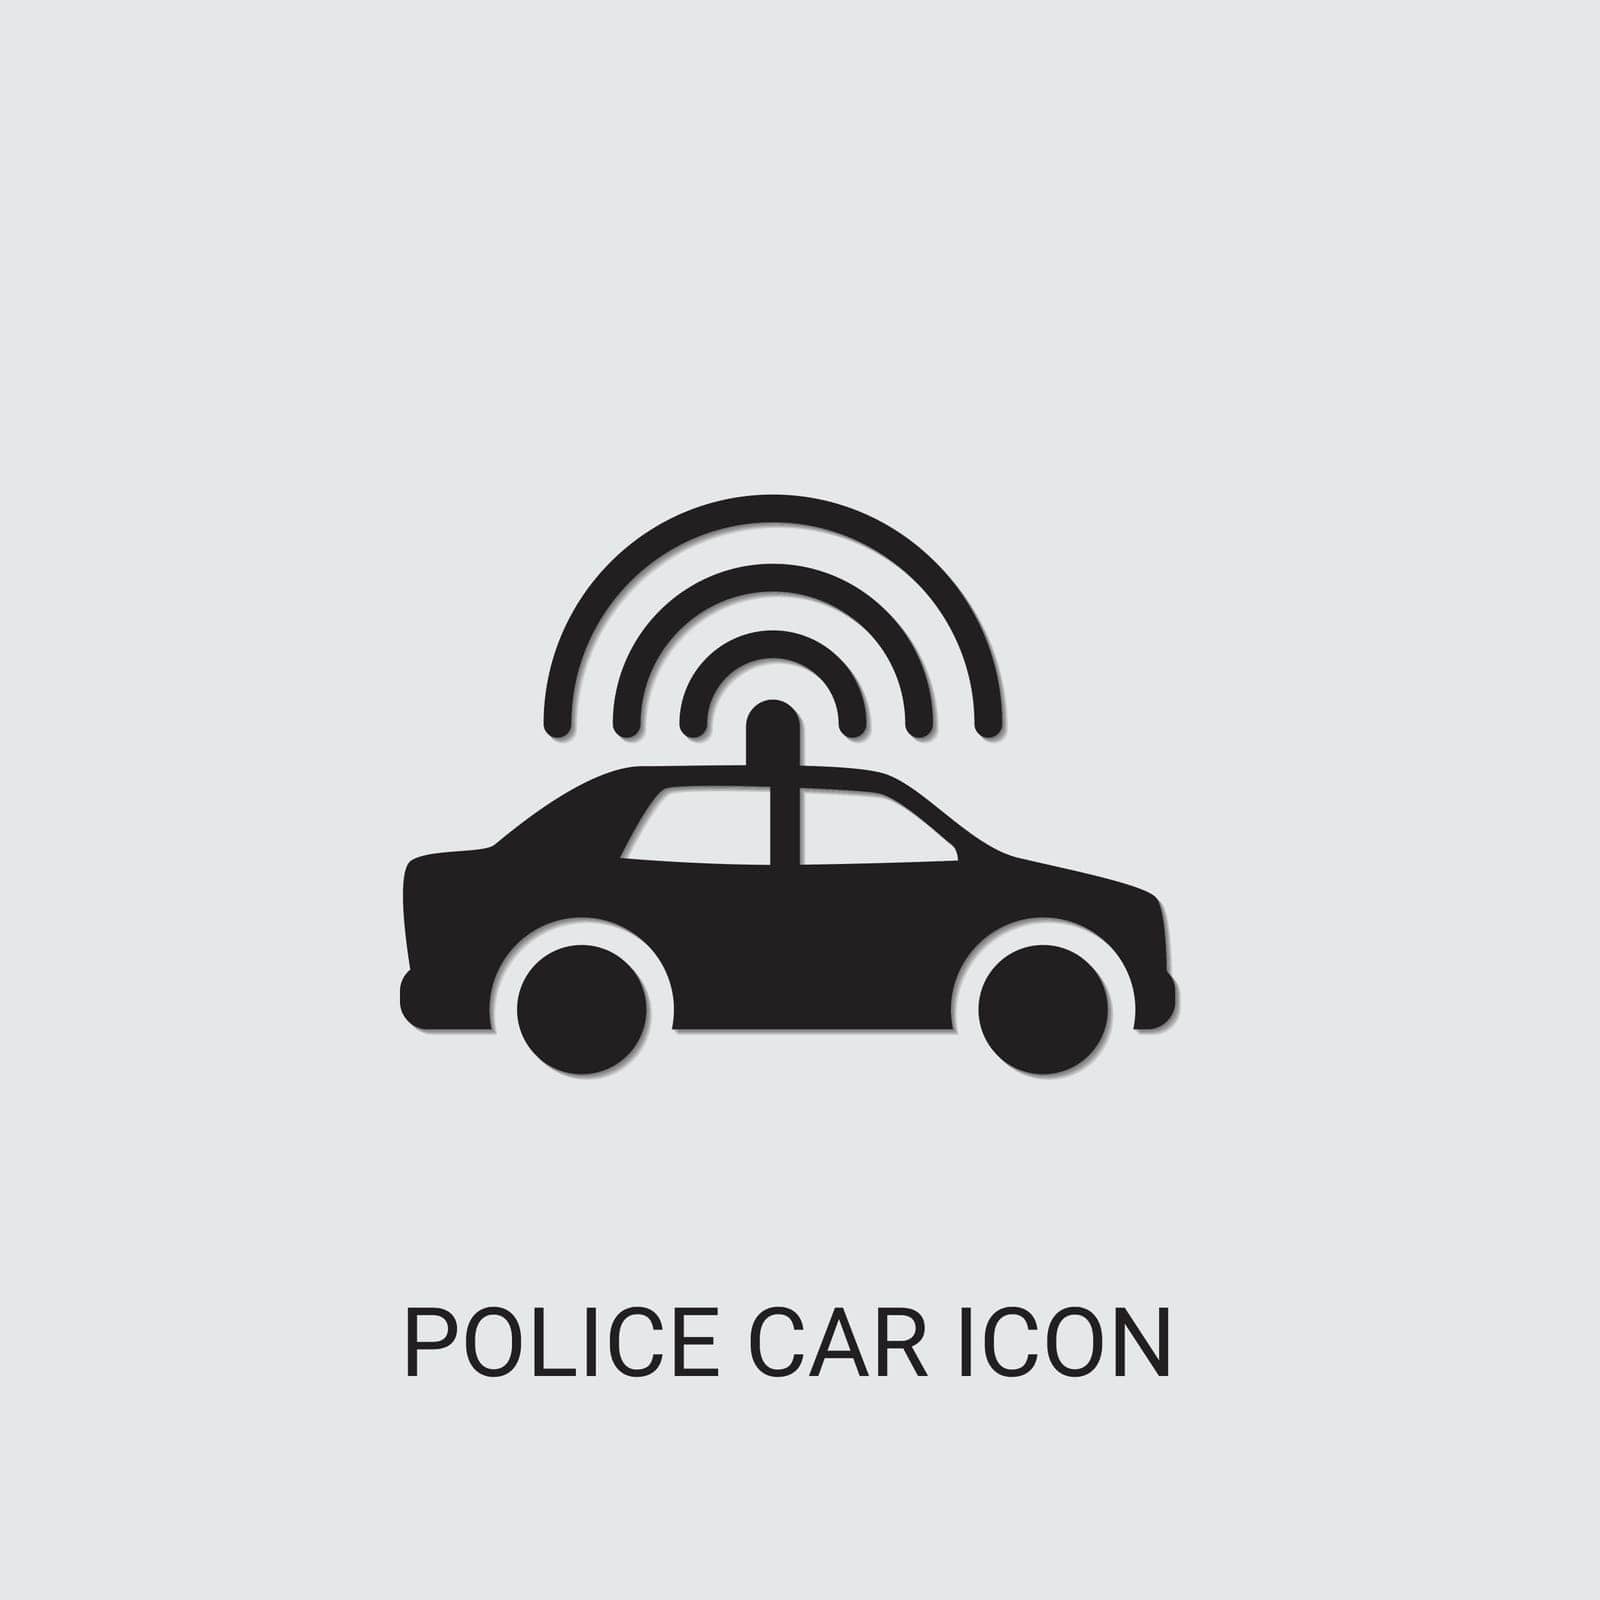 symbol,repair,mirror,siren,concept,icon,sign,isolated,mechanic,simple,chase,sheriff,car,web,flat,vector,lights,element,glass,set,black,eps,filled,airport,police,light,background,machine,illustration,windshield,policeman